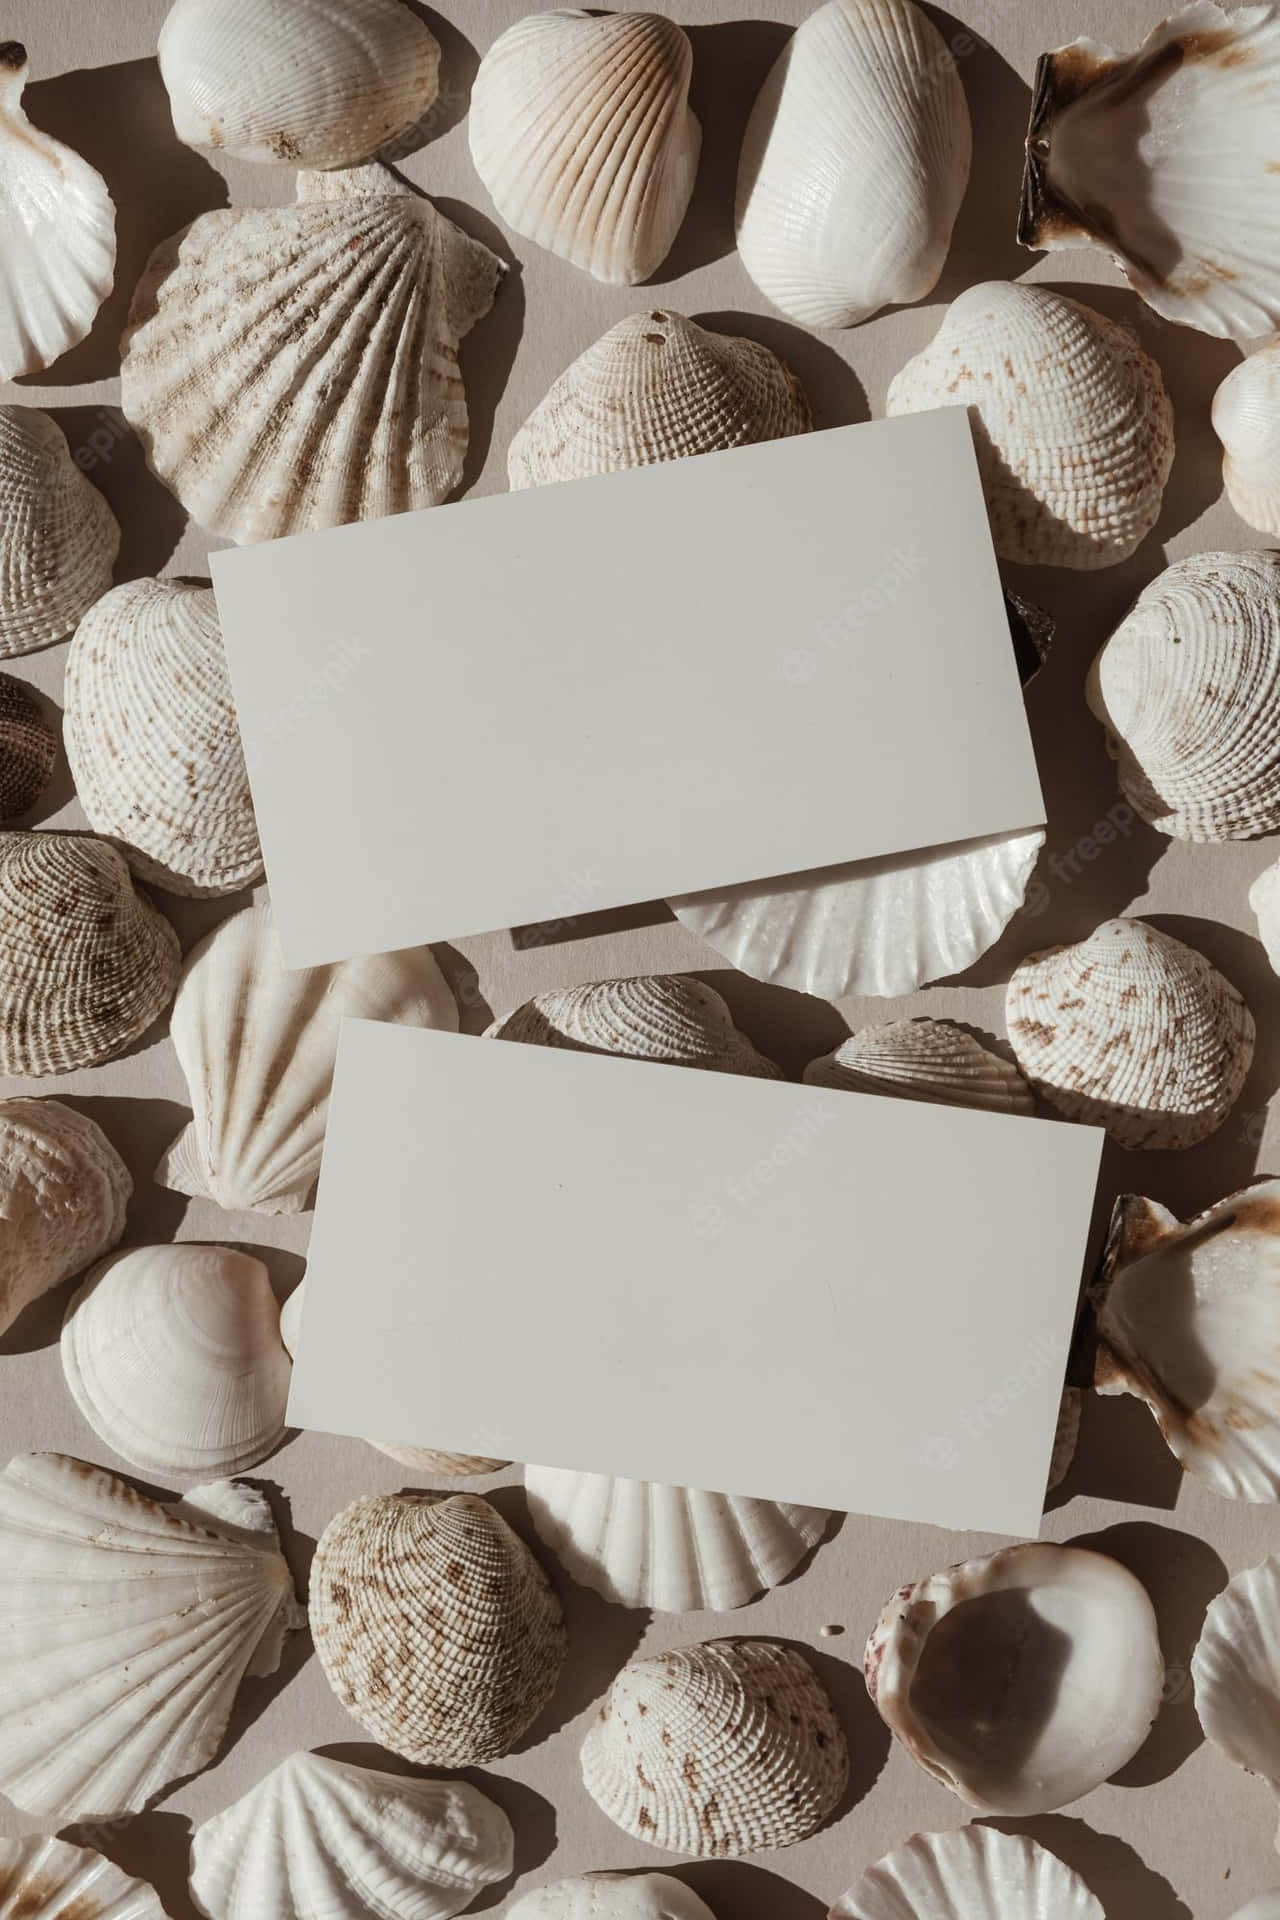 A White Card Is Laying On A Pile Of Seashells